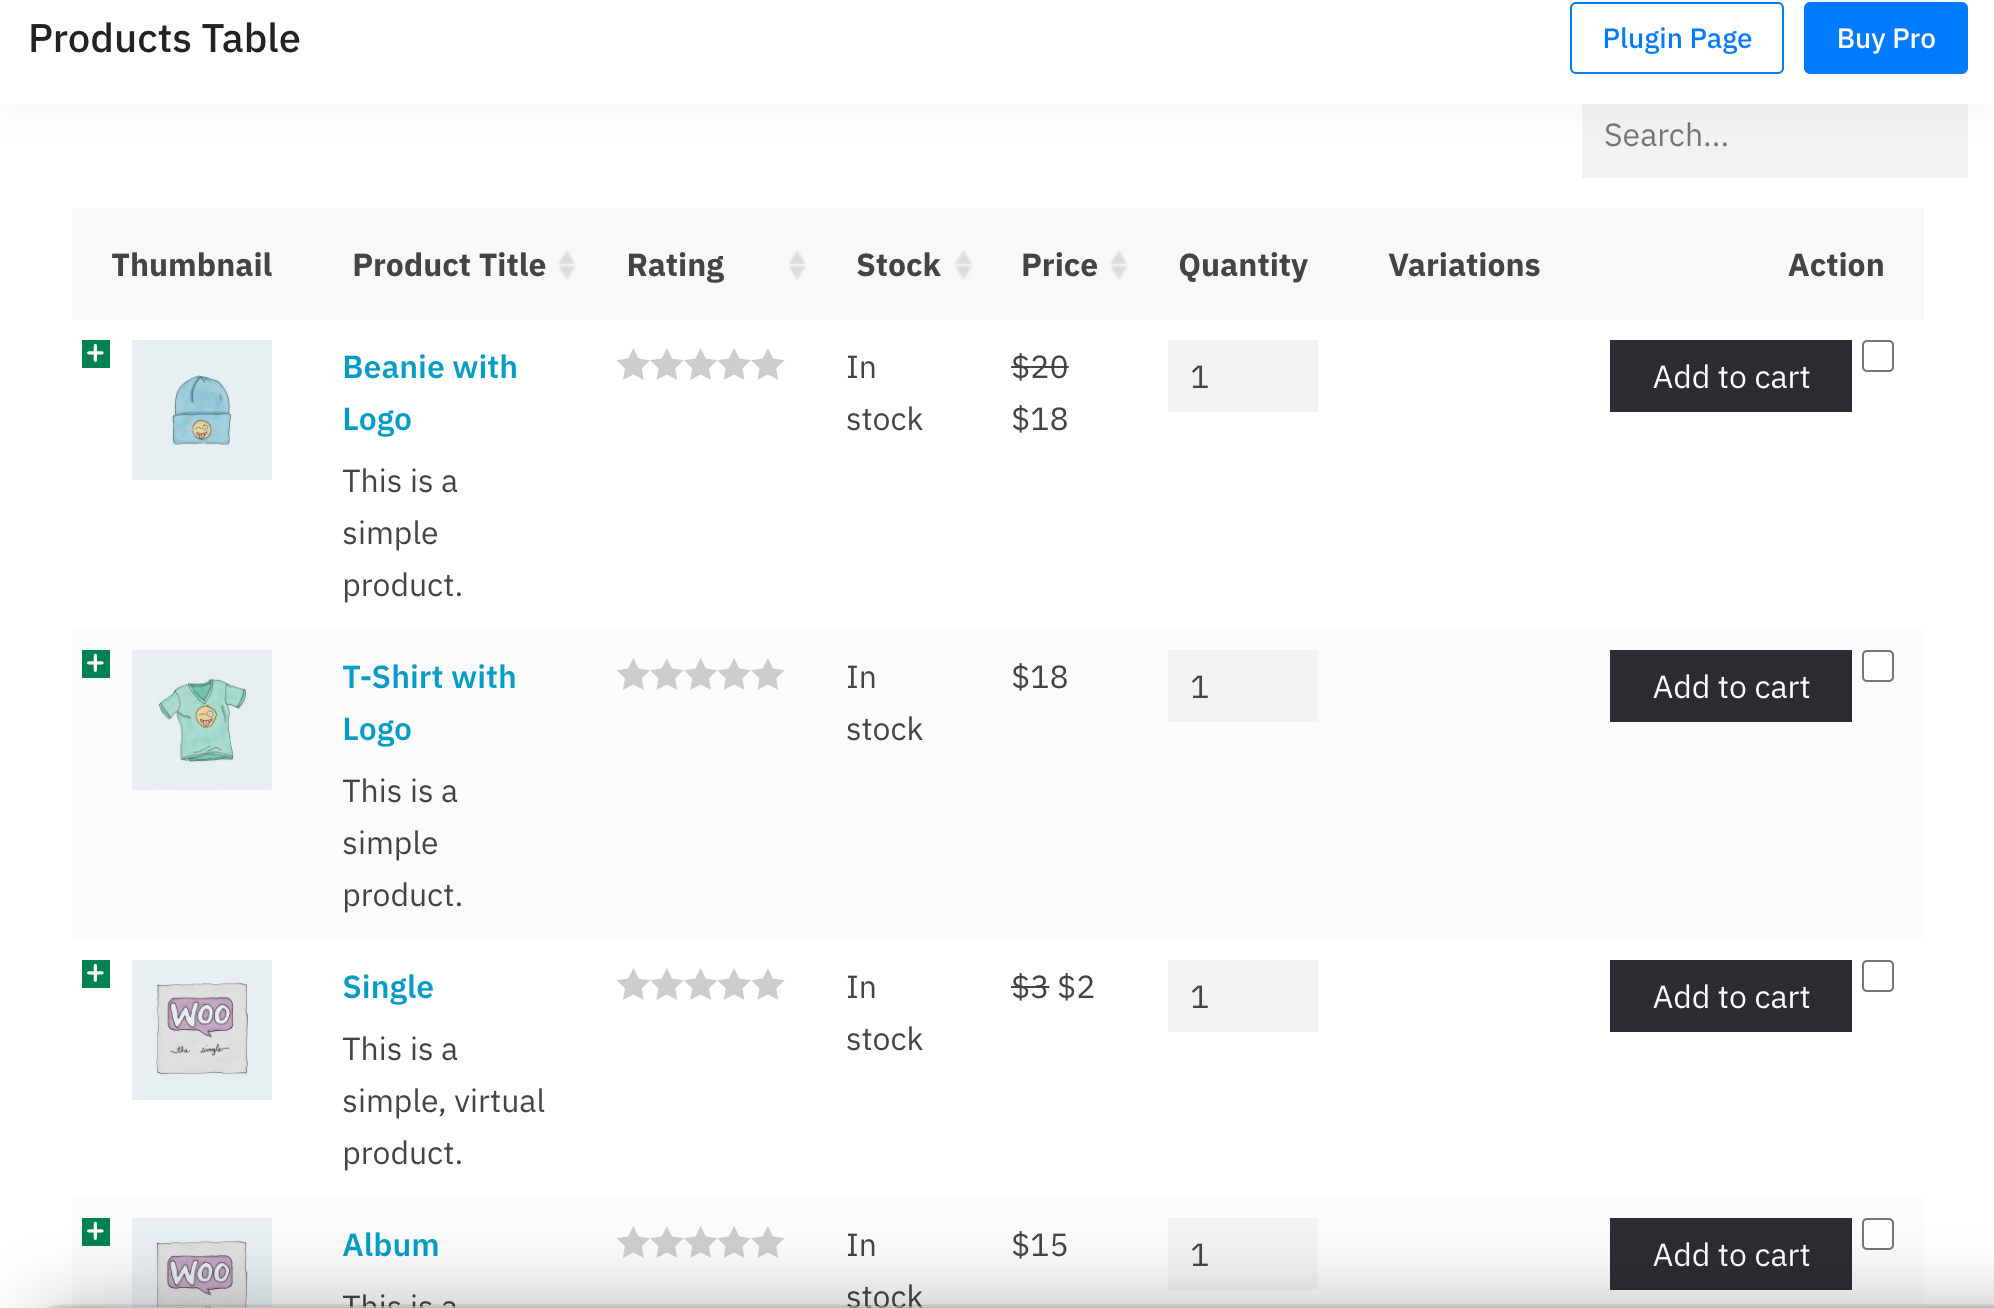 It also allows you to select which columns should be displayed in the product table